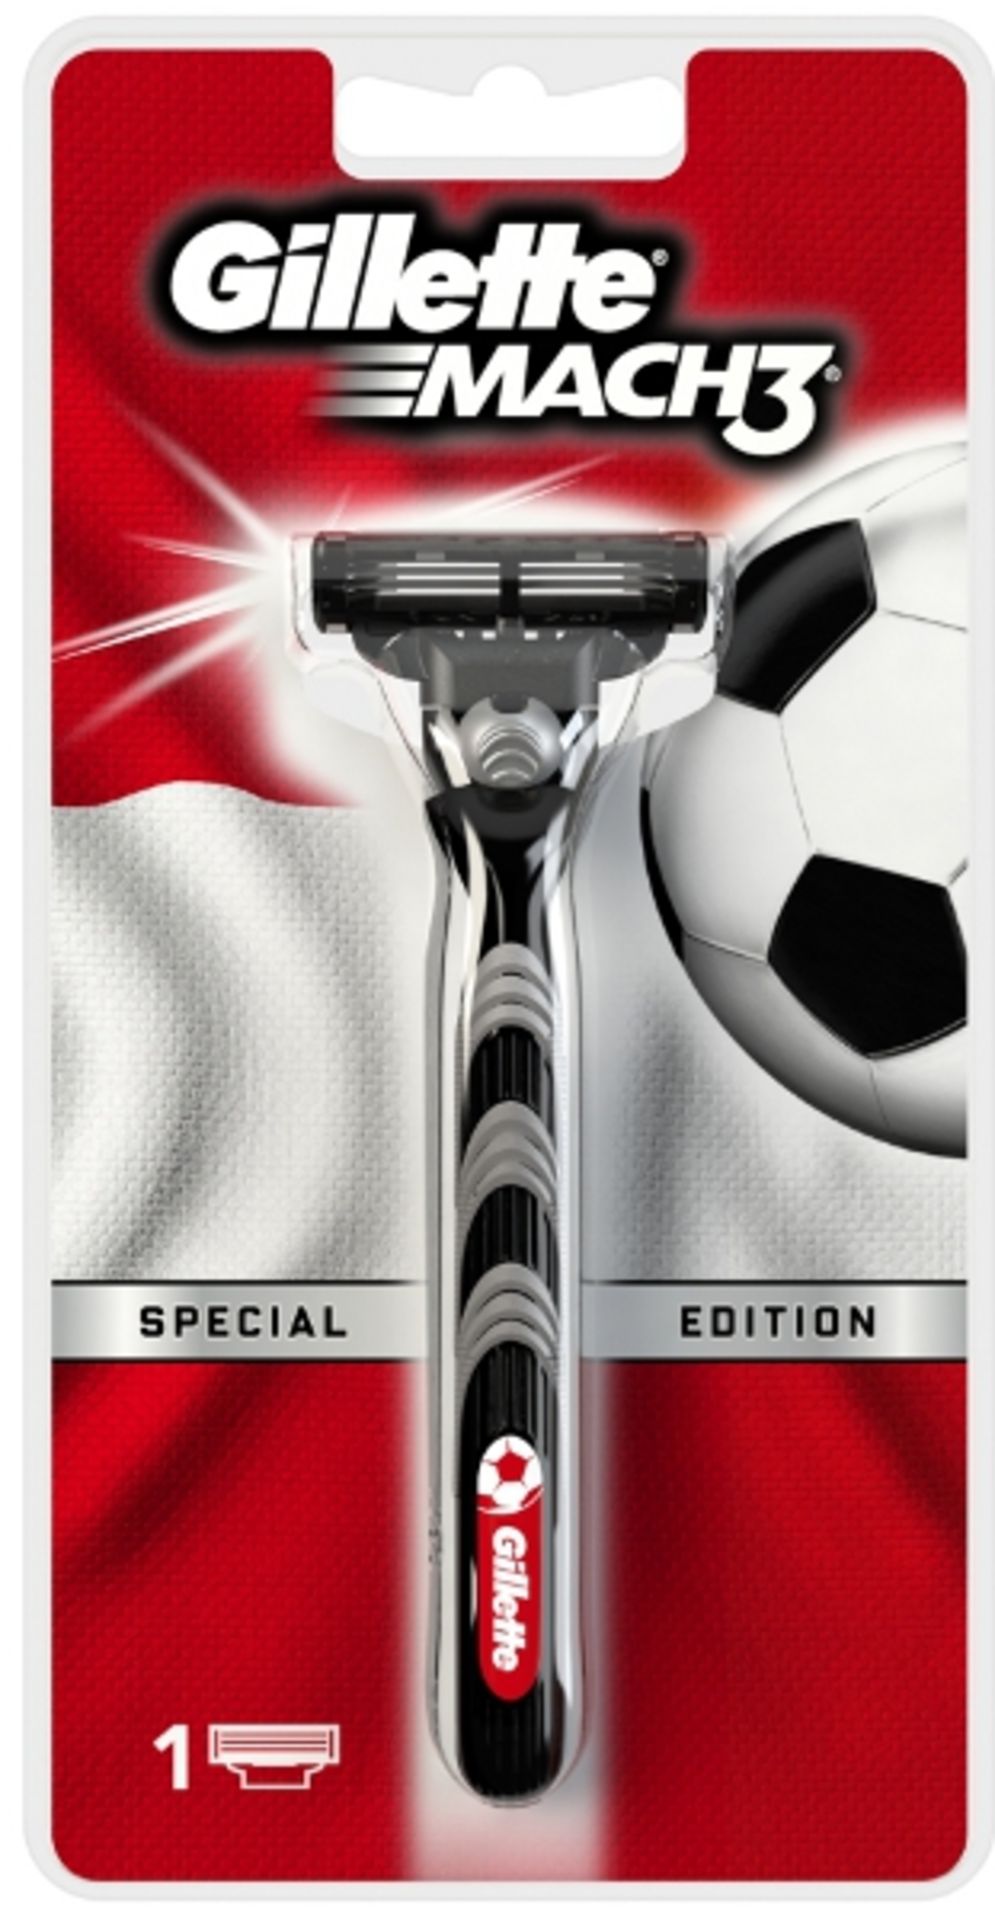 V *TRADE QTY* Brand New Gillette Mach3 Football Special Edition X 90 YOUR BID PRICE TO BE MULTIPLIED